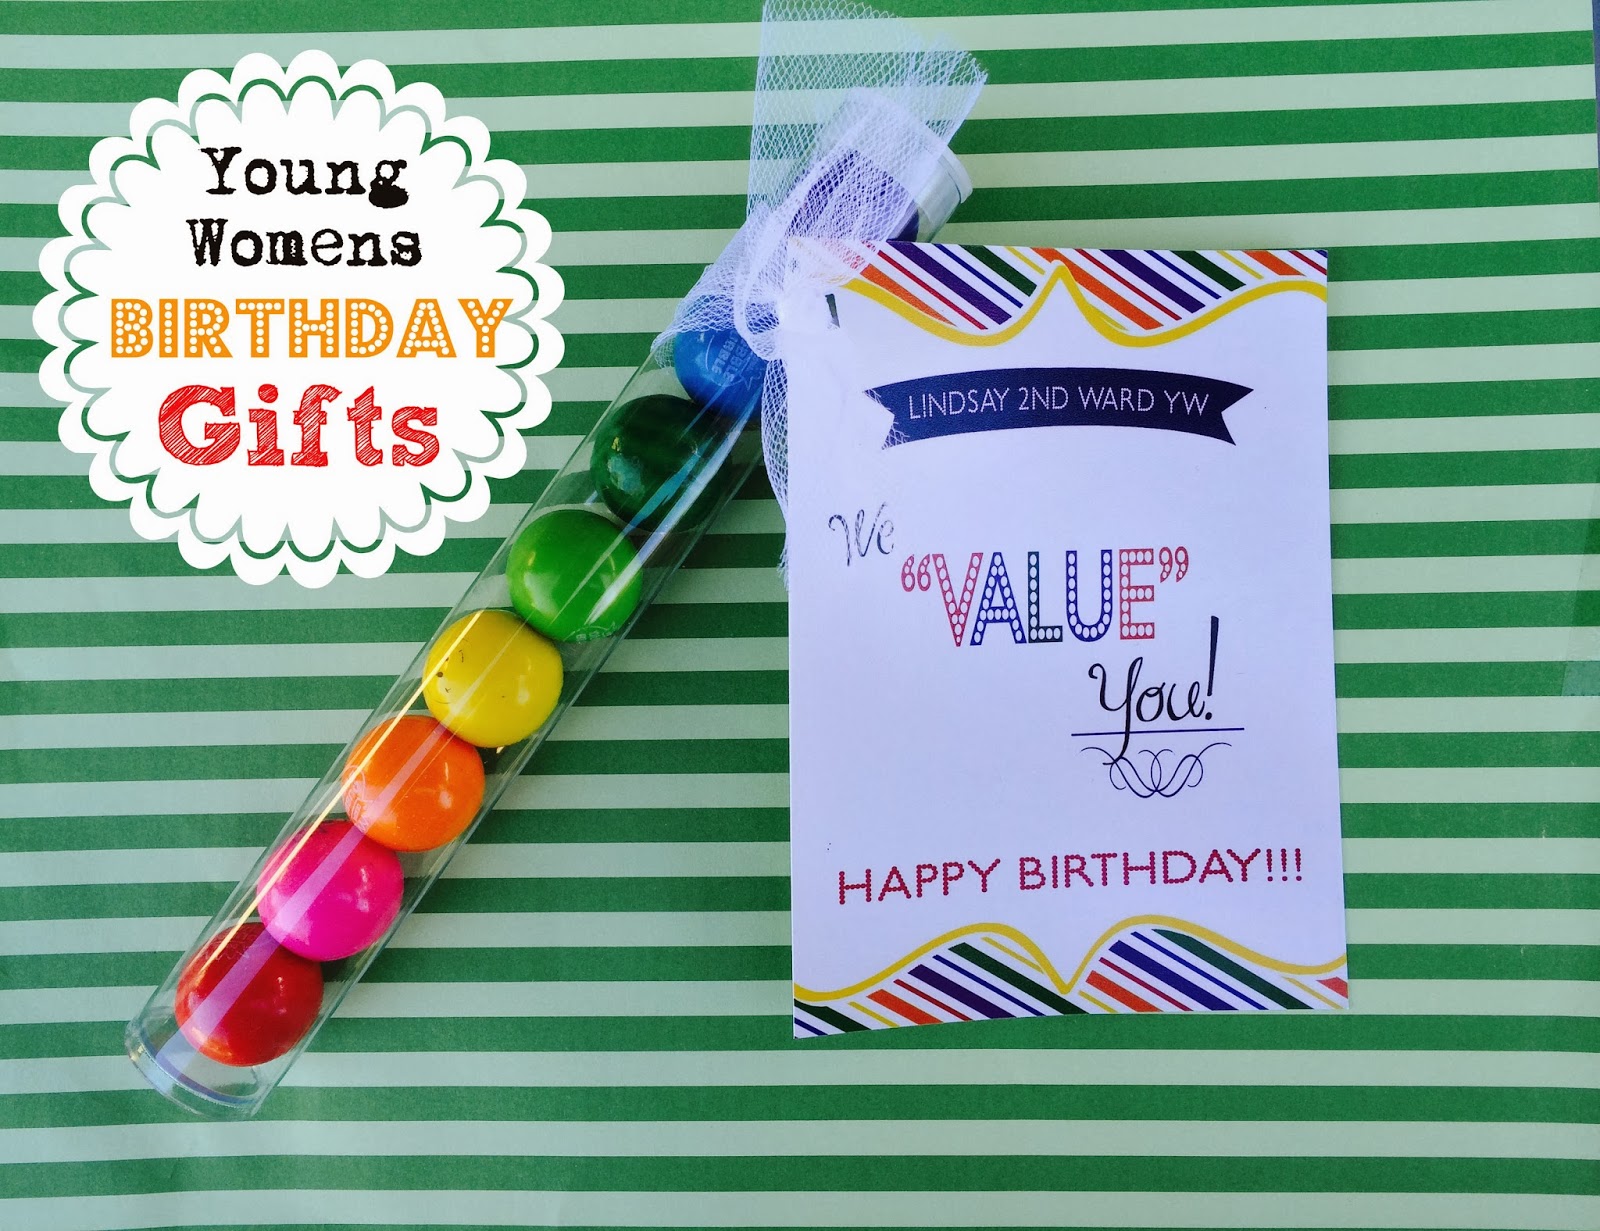 Young Womens Birthday Gift idea with FREE printable.